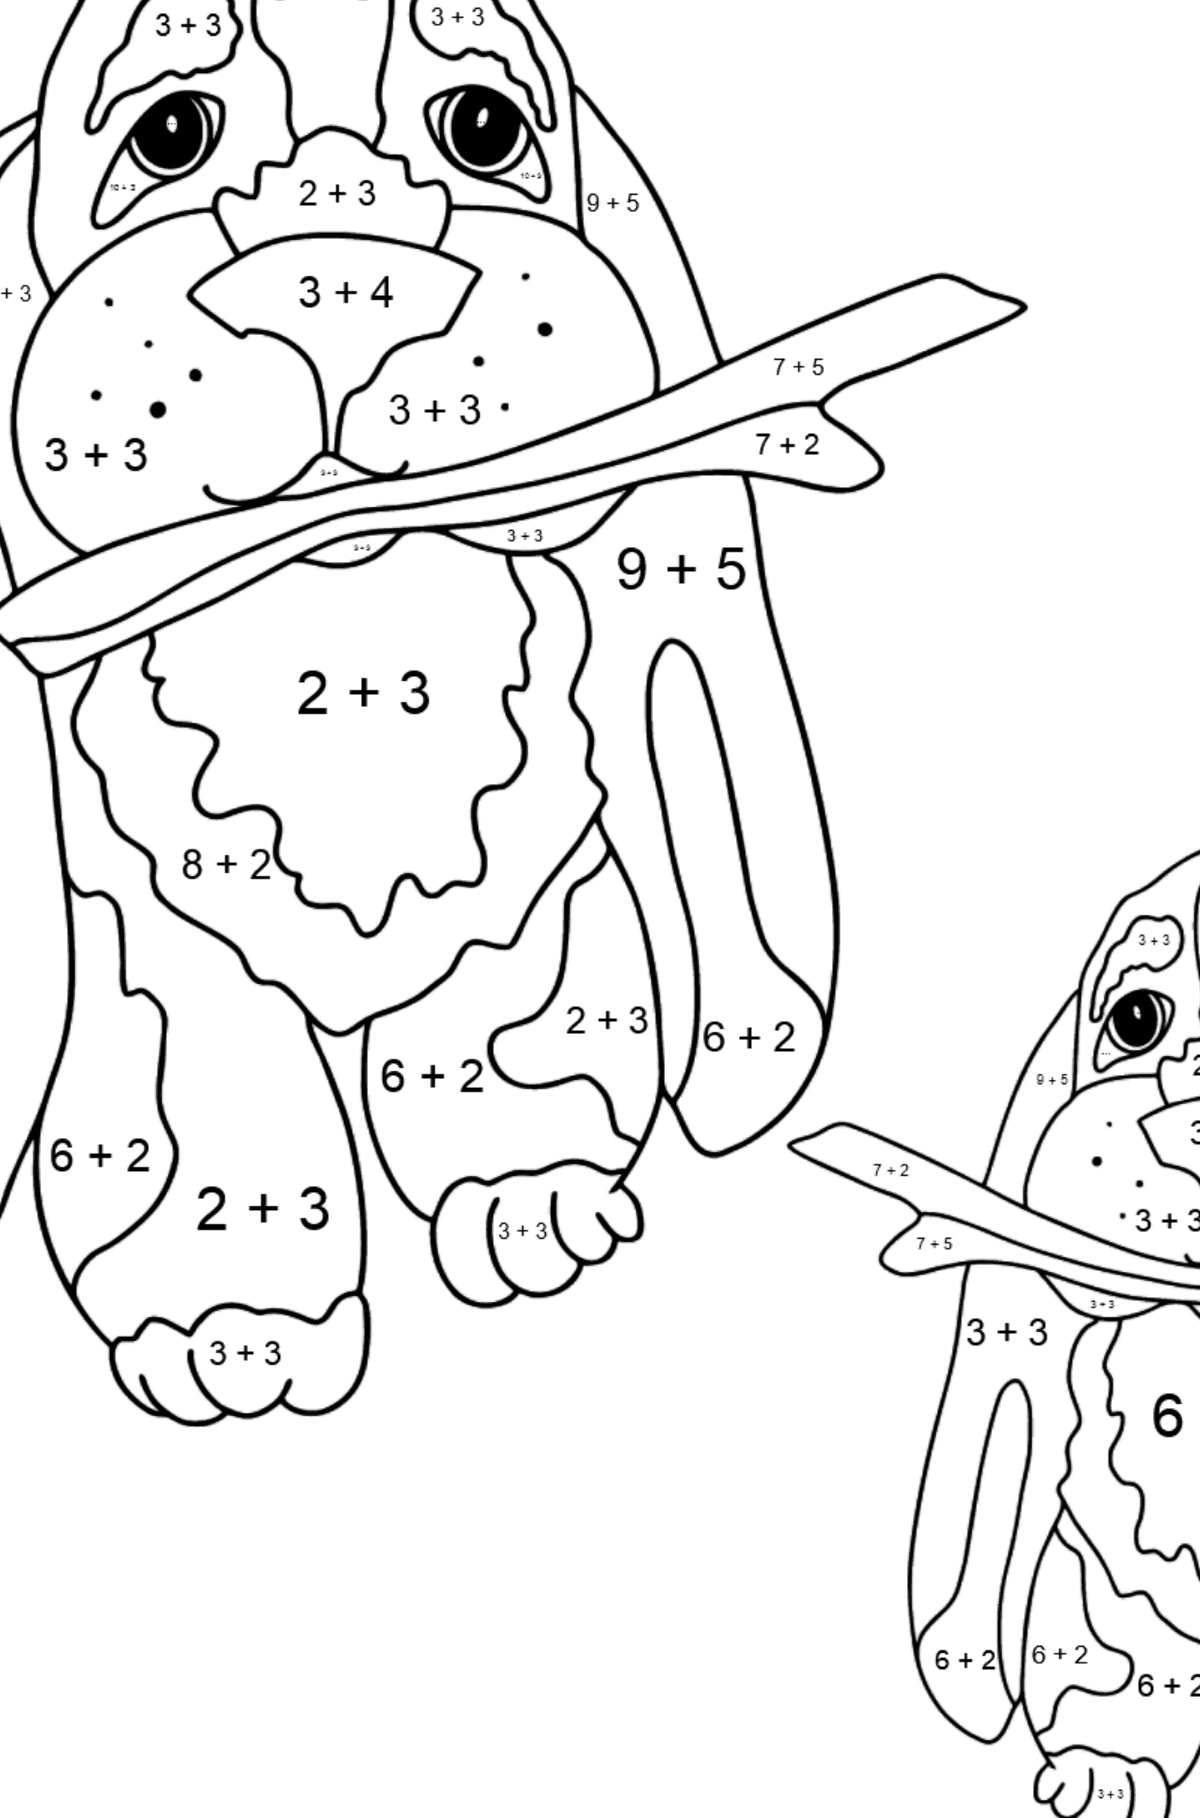 Coloring Page - Two Dogs are Playing with Sticks - Math Coloring - Addition for Kids